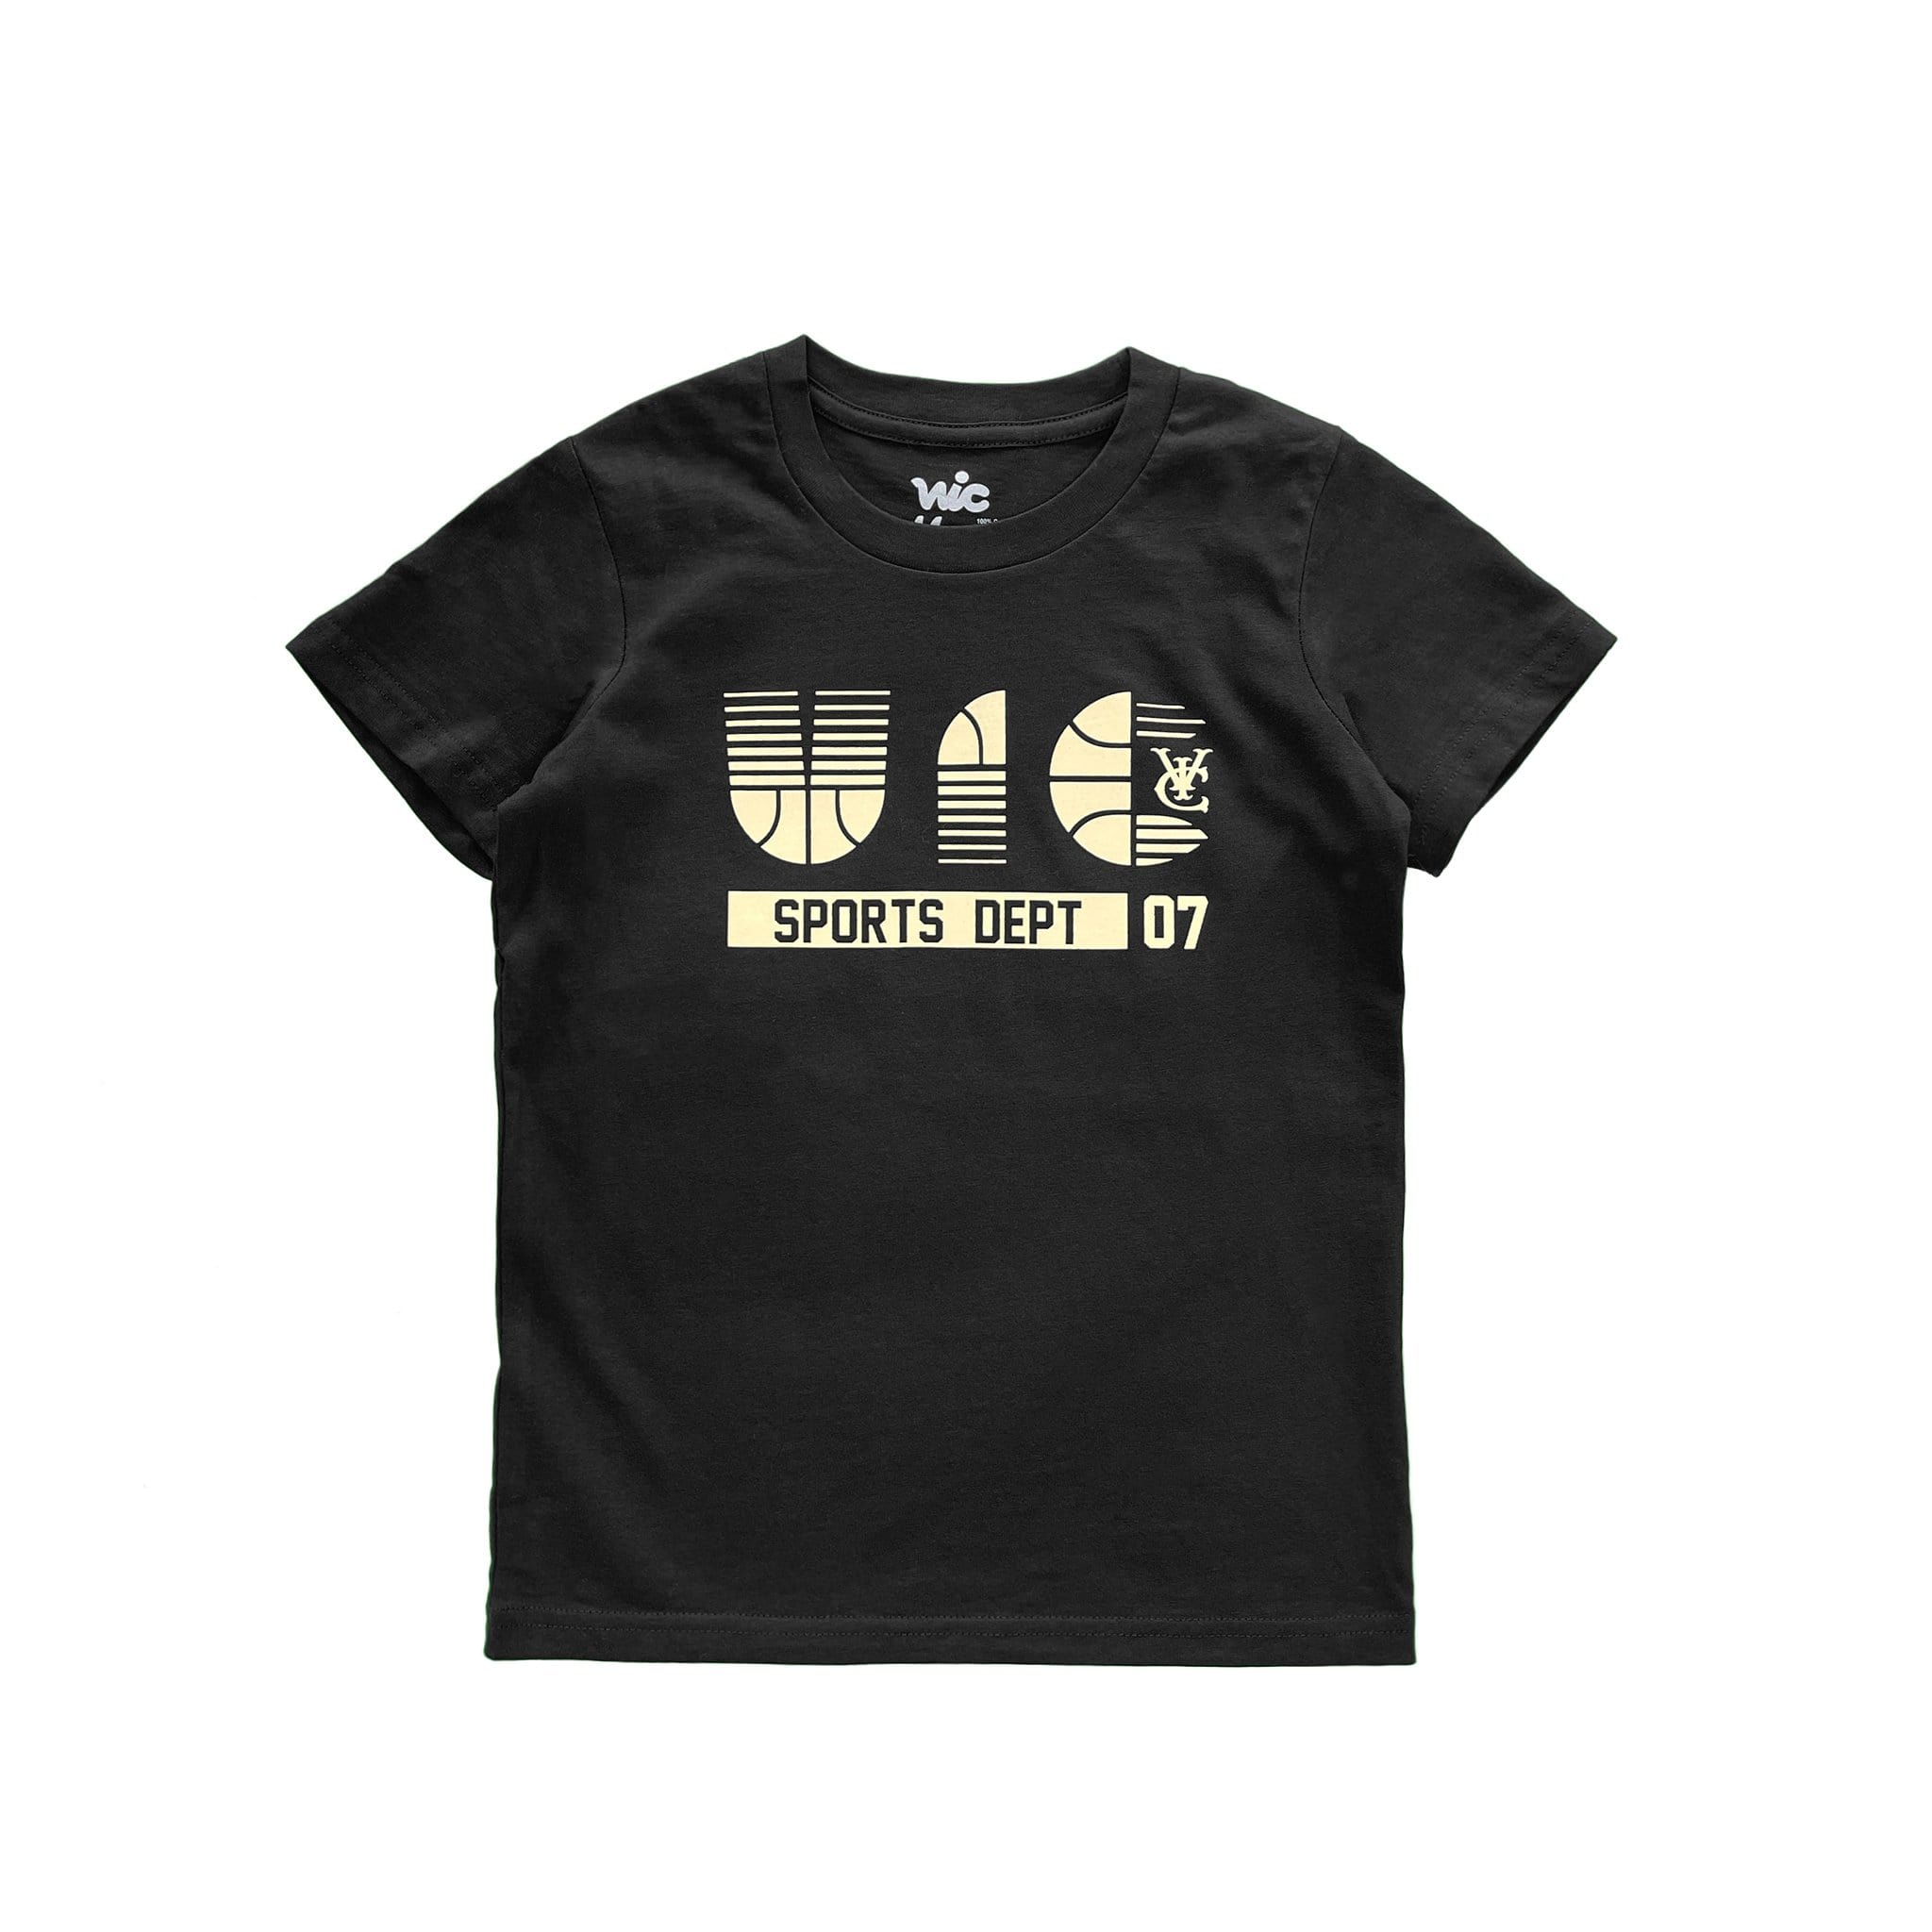 Premium quality youth Tee Shirt by New Zealand skate and streetwear clothing label VIC Apparel. logo screenprint on front. Regular fit, Mid-weight, 180 GSM, 100% Cotton.